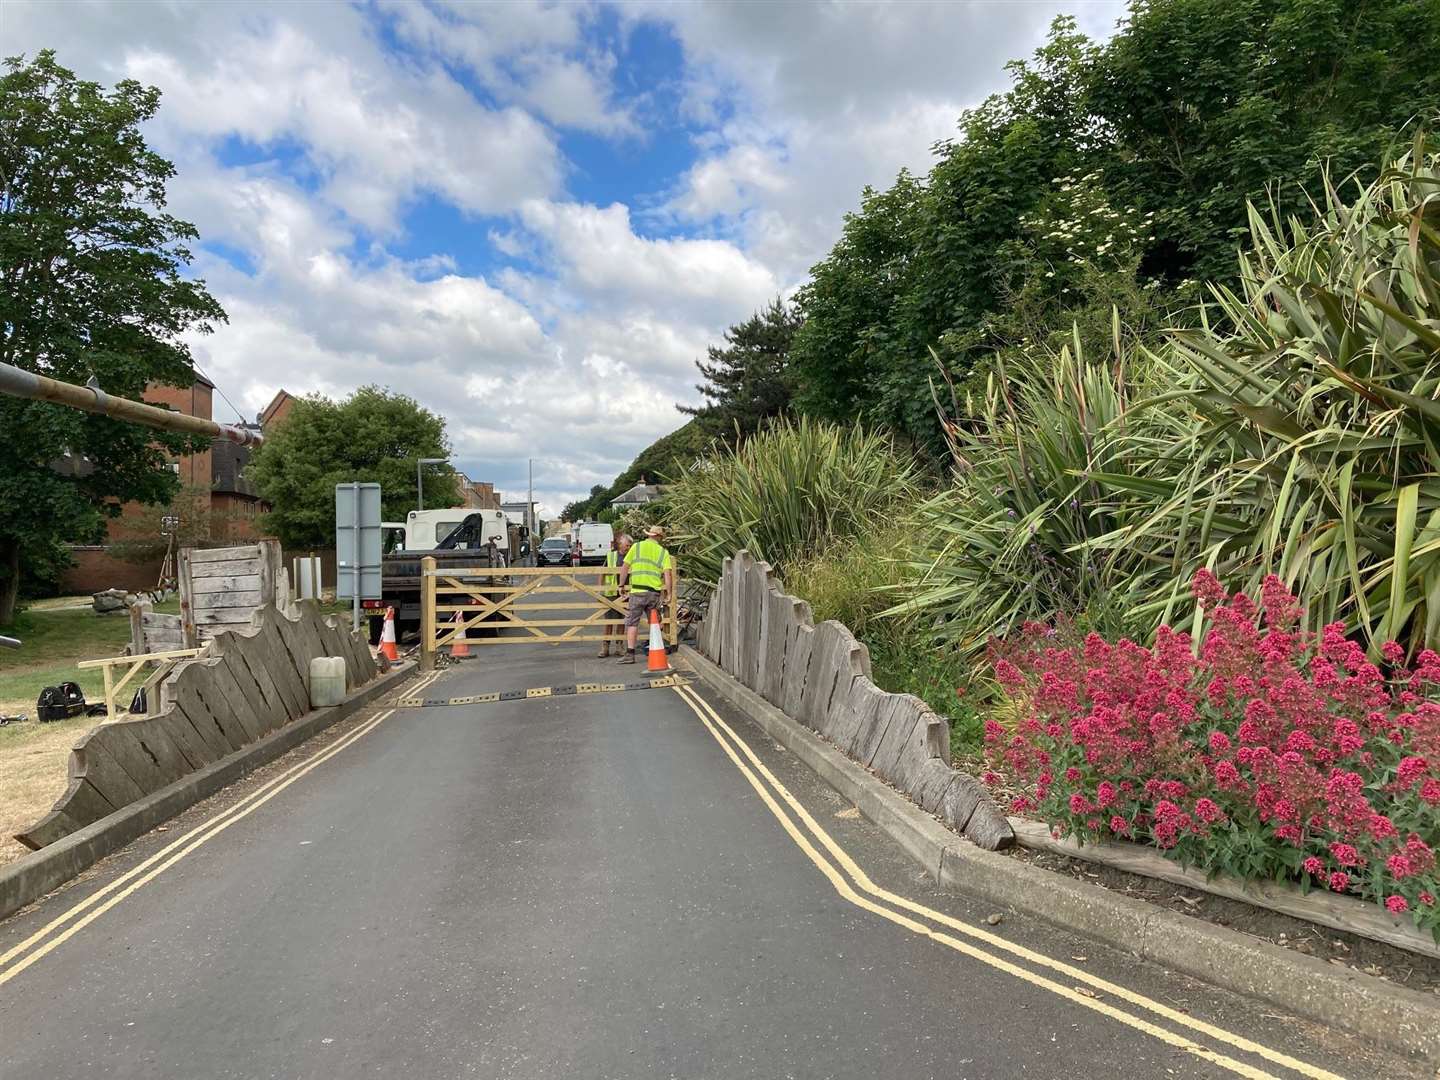 The new gate was installed at the Lower Leas Coastal Park to stop people staying overnight - but now drivers are getting trapped in the lot. Picture: FHDC